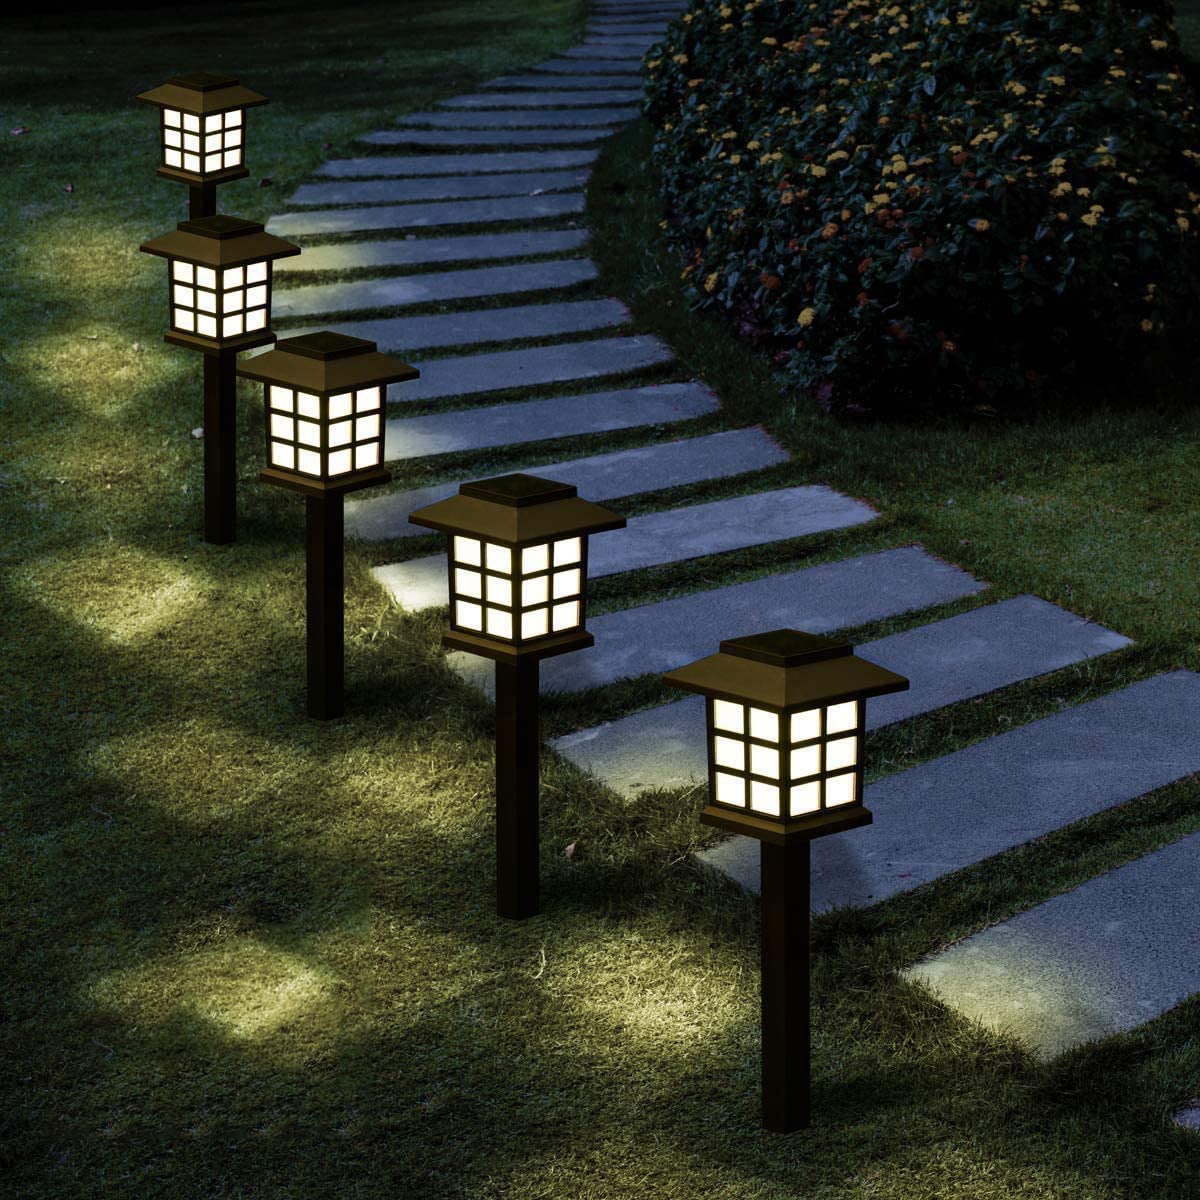 8 Pack Pathway Solar Lights w/7 Color Changing Outdoor Garden Stake Waterproof 